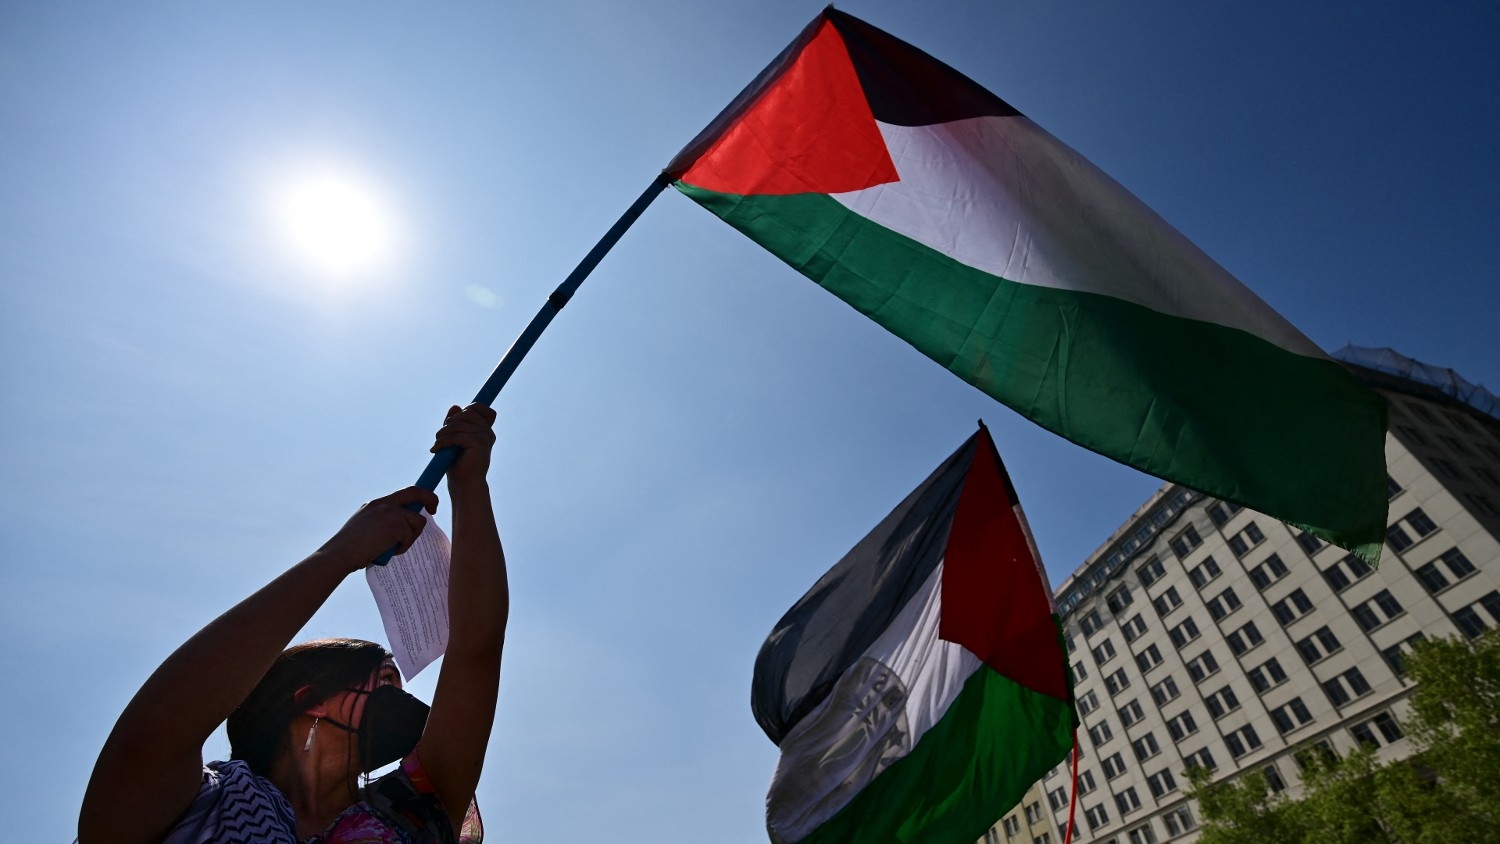 A member of the Palestinian community in Chile waves a Palestinian flag during a demonstration outside La Moneda palace in Santiago on 30 September 2022.